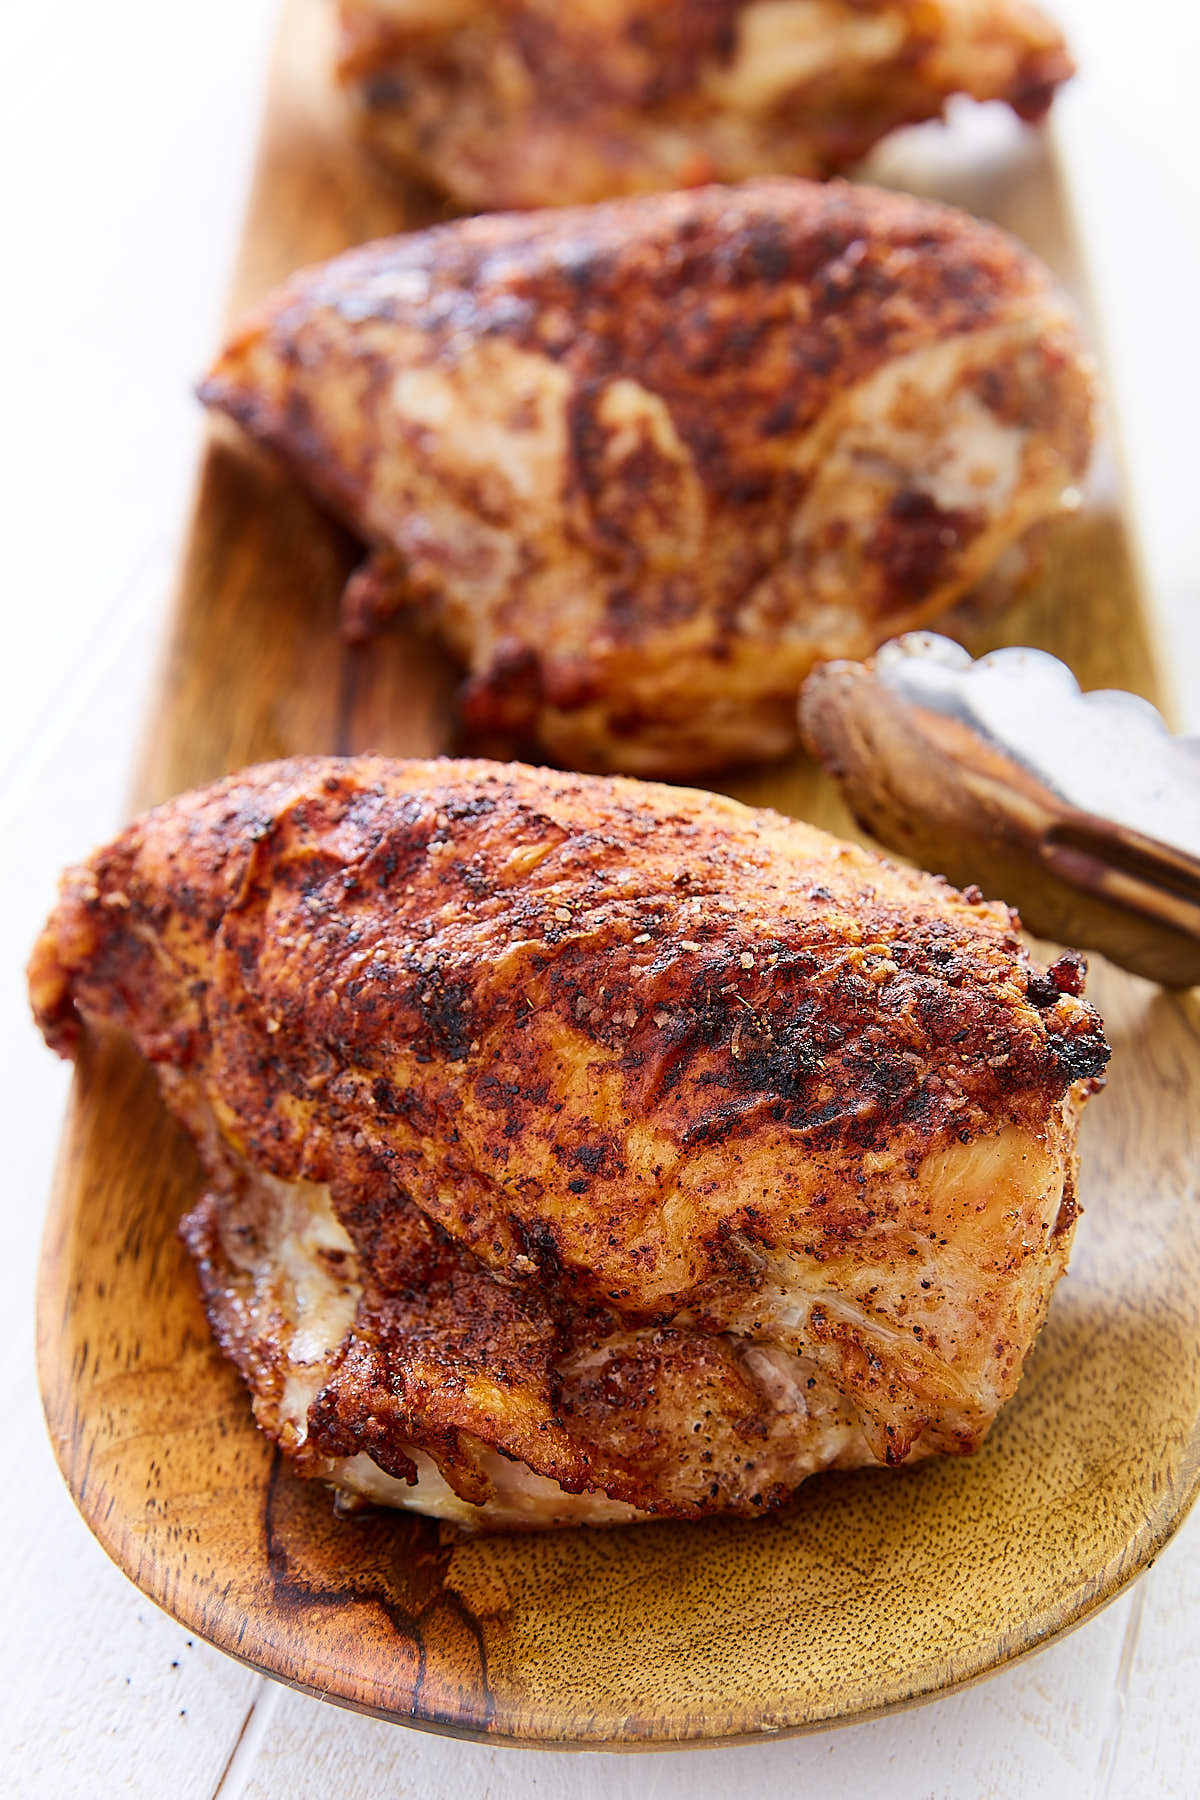 How Long To Cook Chicken Breasts In The Oven
 Crispy Oven Roasted Chicken Breast i FOOD Blogger